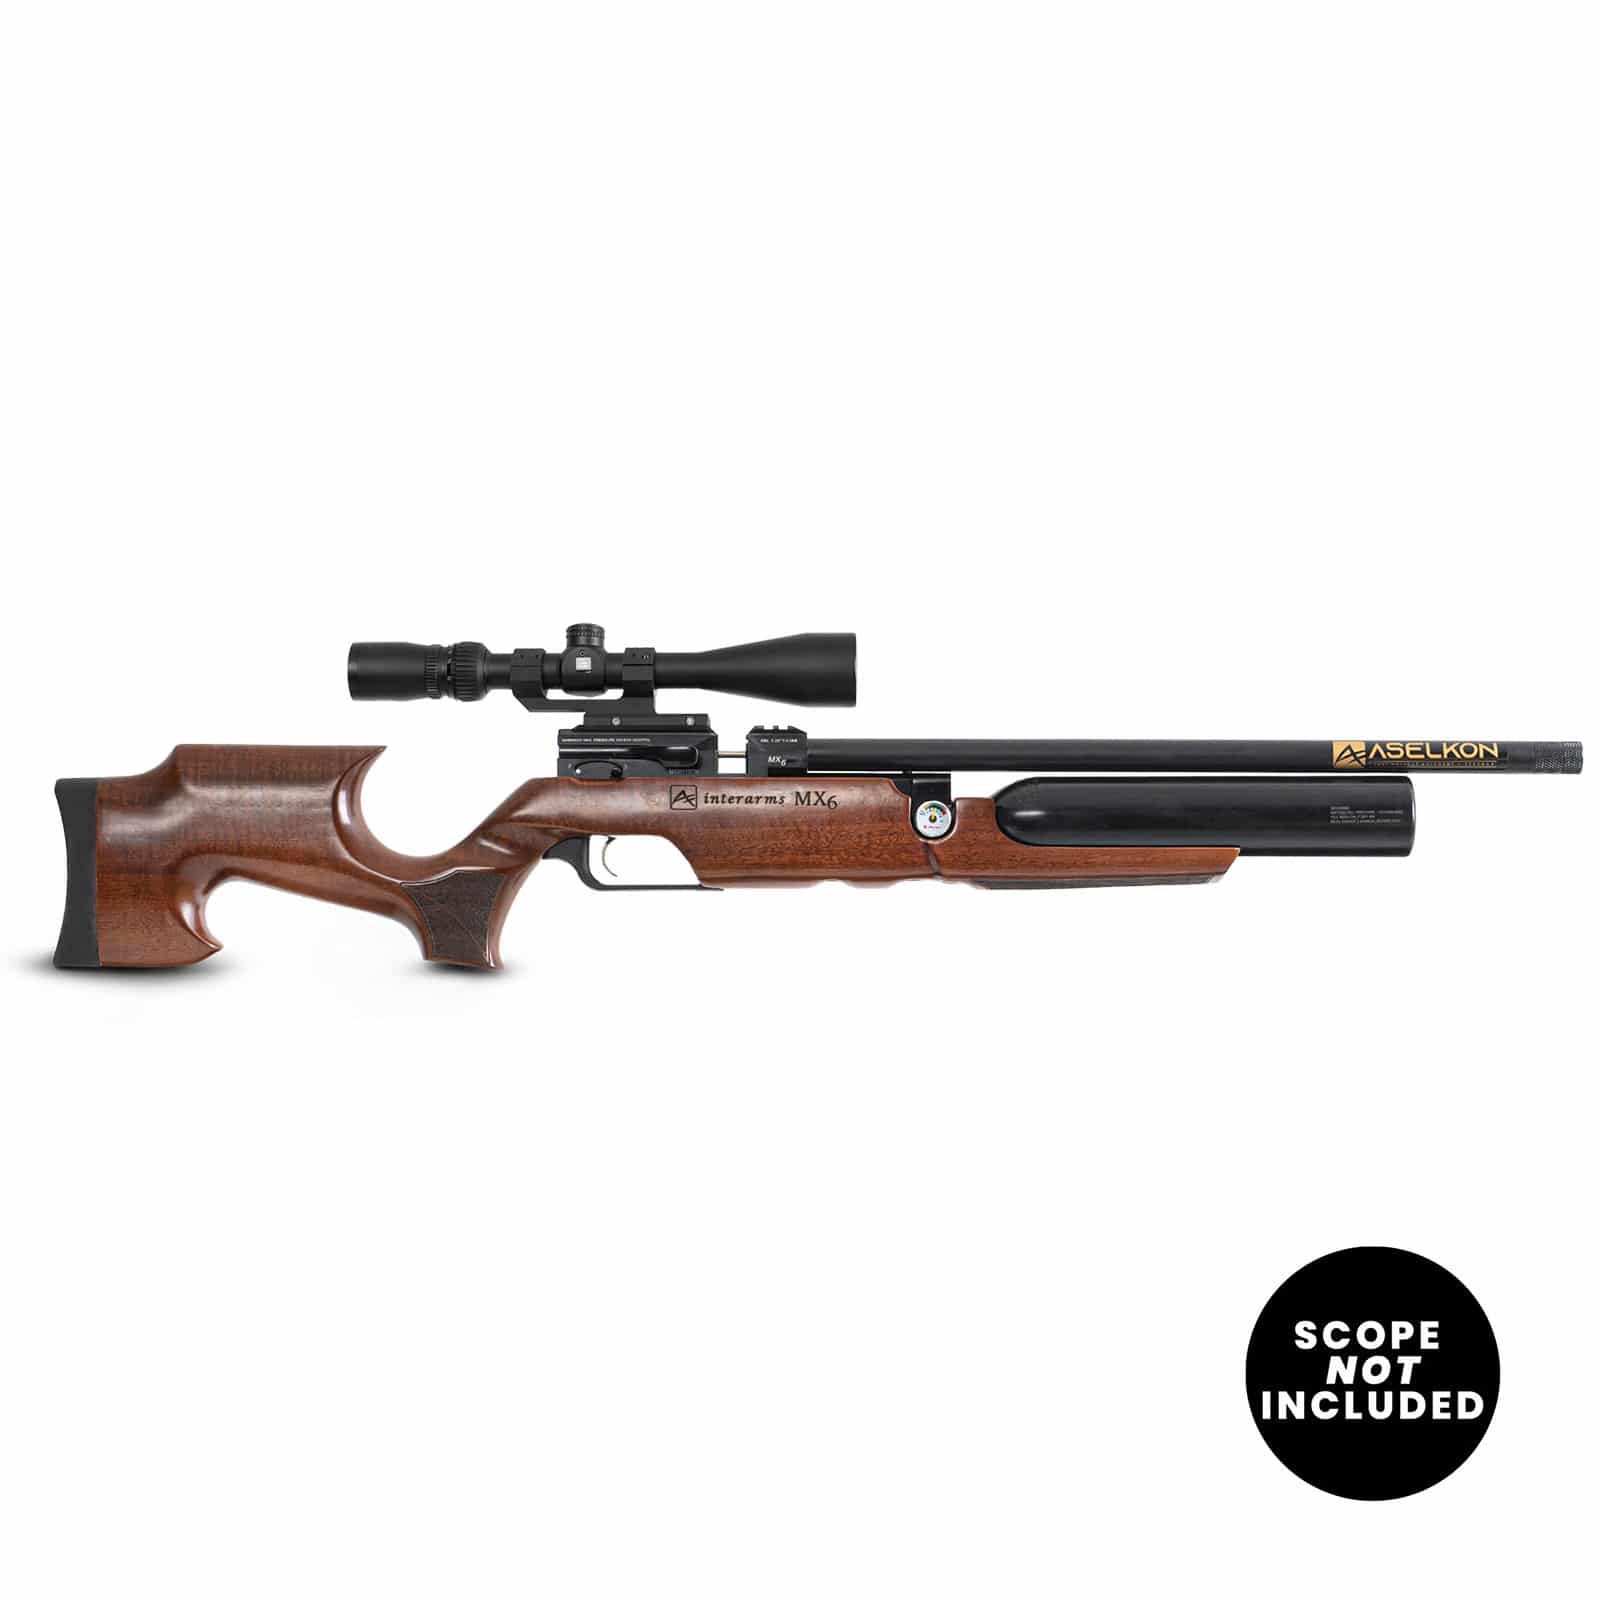 MX6 best air rifle image with a label saying scope not included